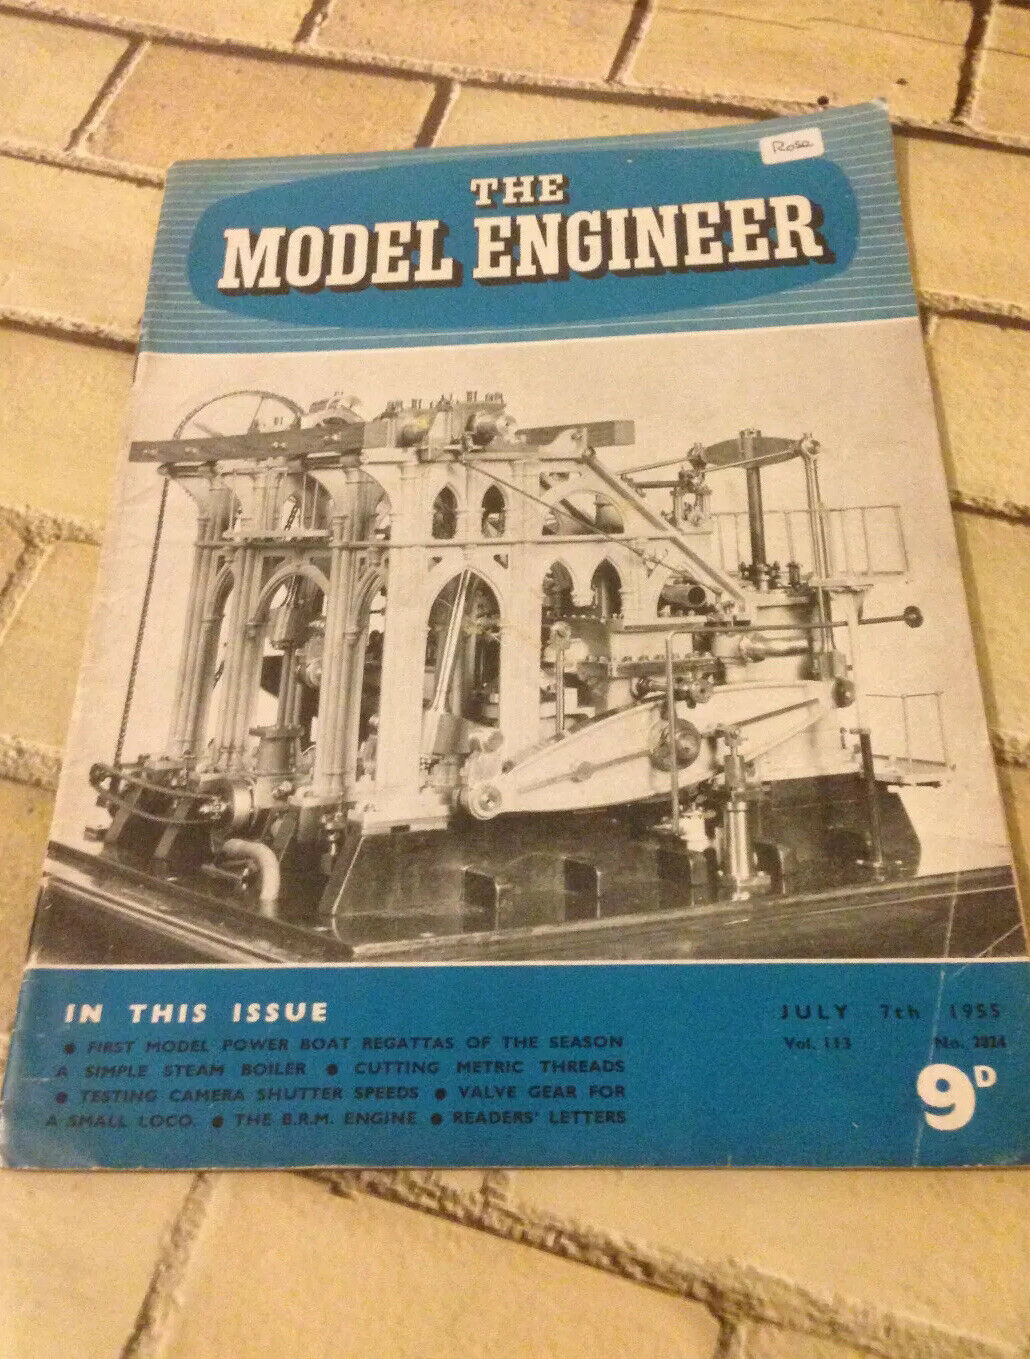 The Model Engineer Vol. 113 Paper Magazine No. 2824 July 7th 1955